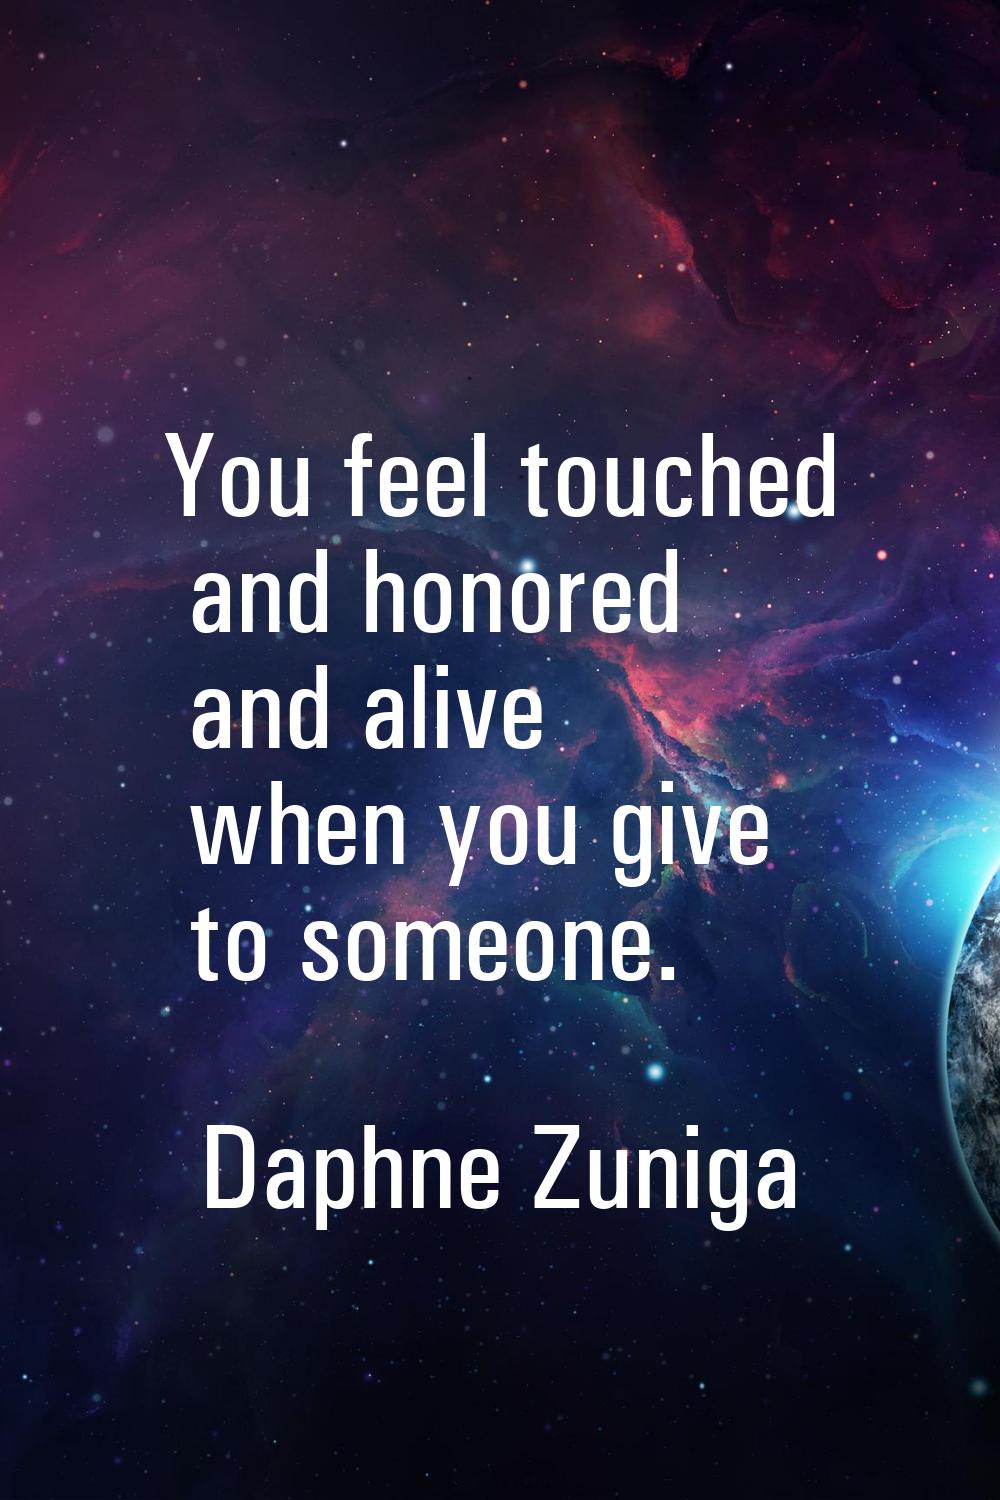 You feel touched and honored and alive when you give to someone.